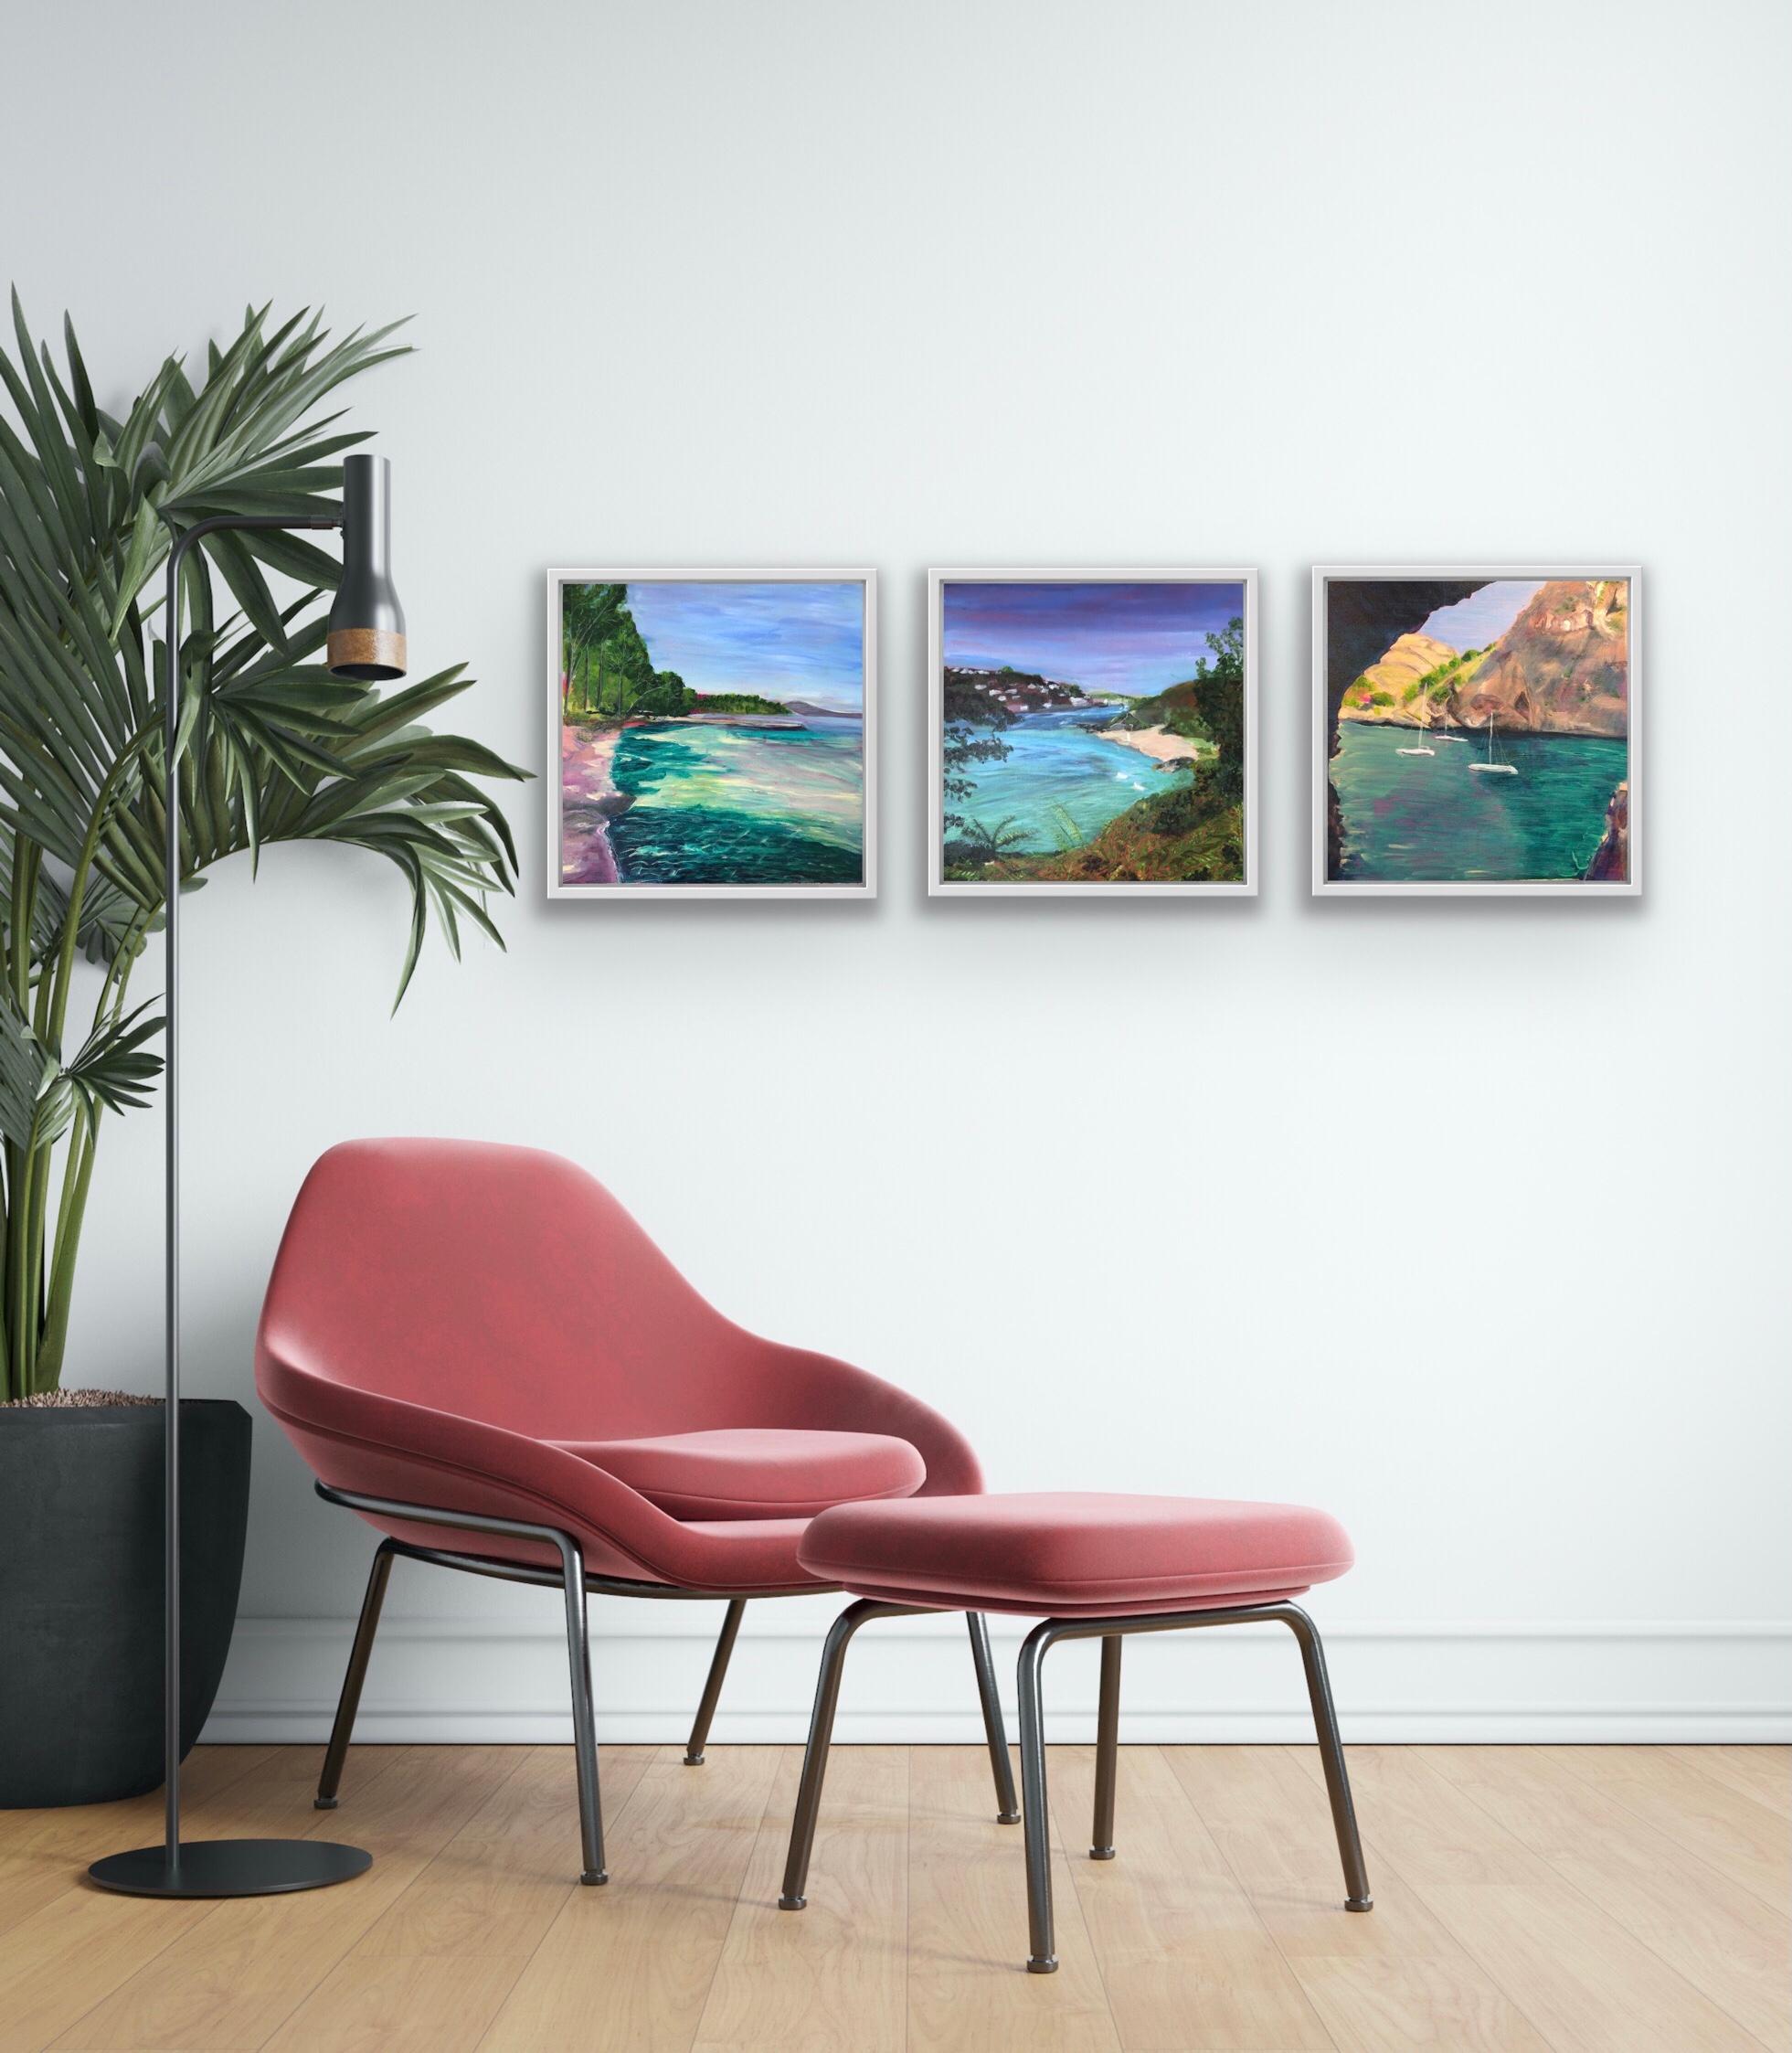 Sa Calobra, Sunny Cove, Salcombe and Badia de Pollenca triptych By Peri Taylor

Overall size cm : H150 x W150

Sunny Cove, Salcombe [2021]
original
Acrylic on Canvas
Image size: H:50 cm x W:50 cm
Complete Size of Unframed Work: H:50 cm x W:50 cm x